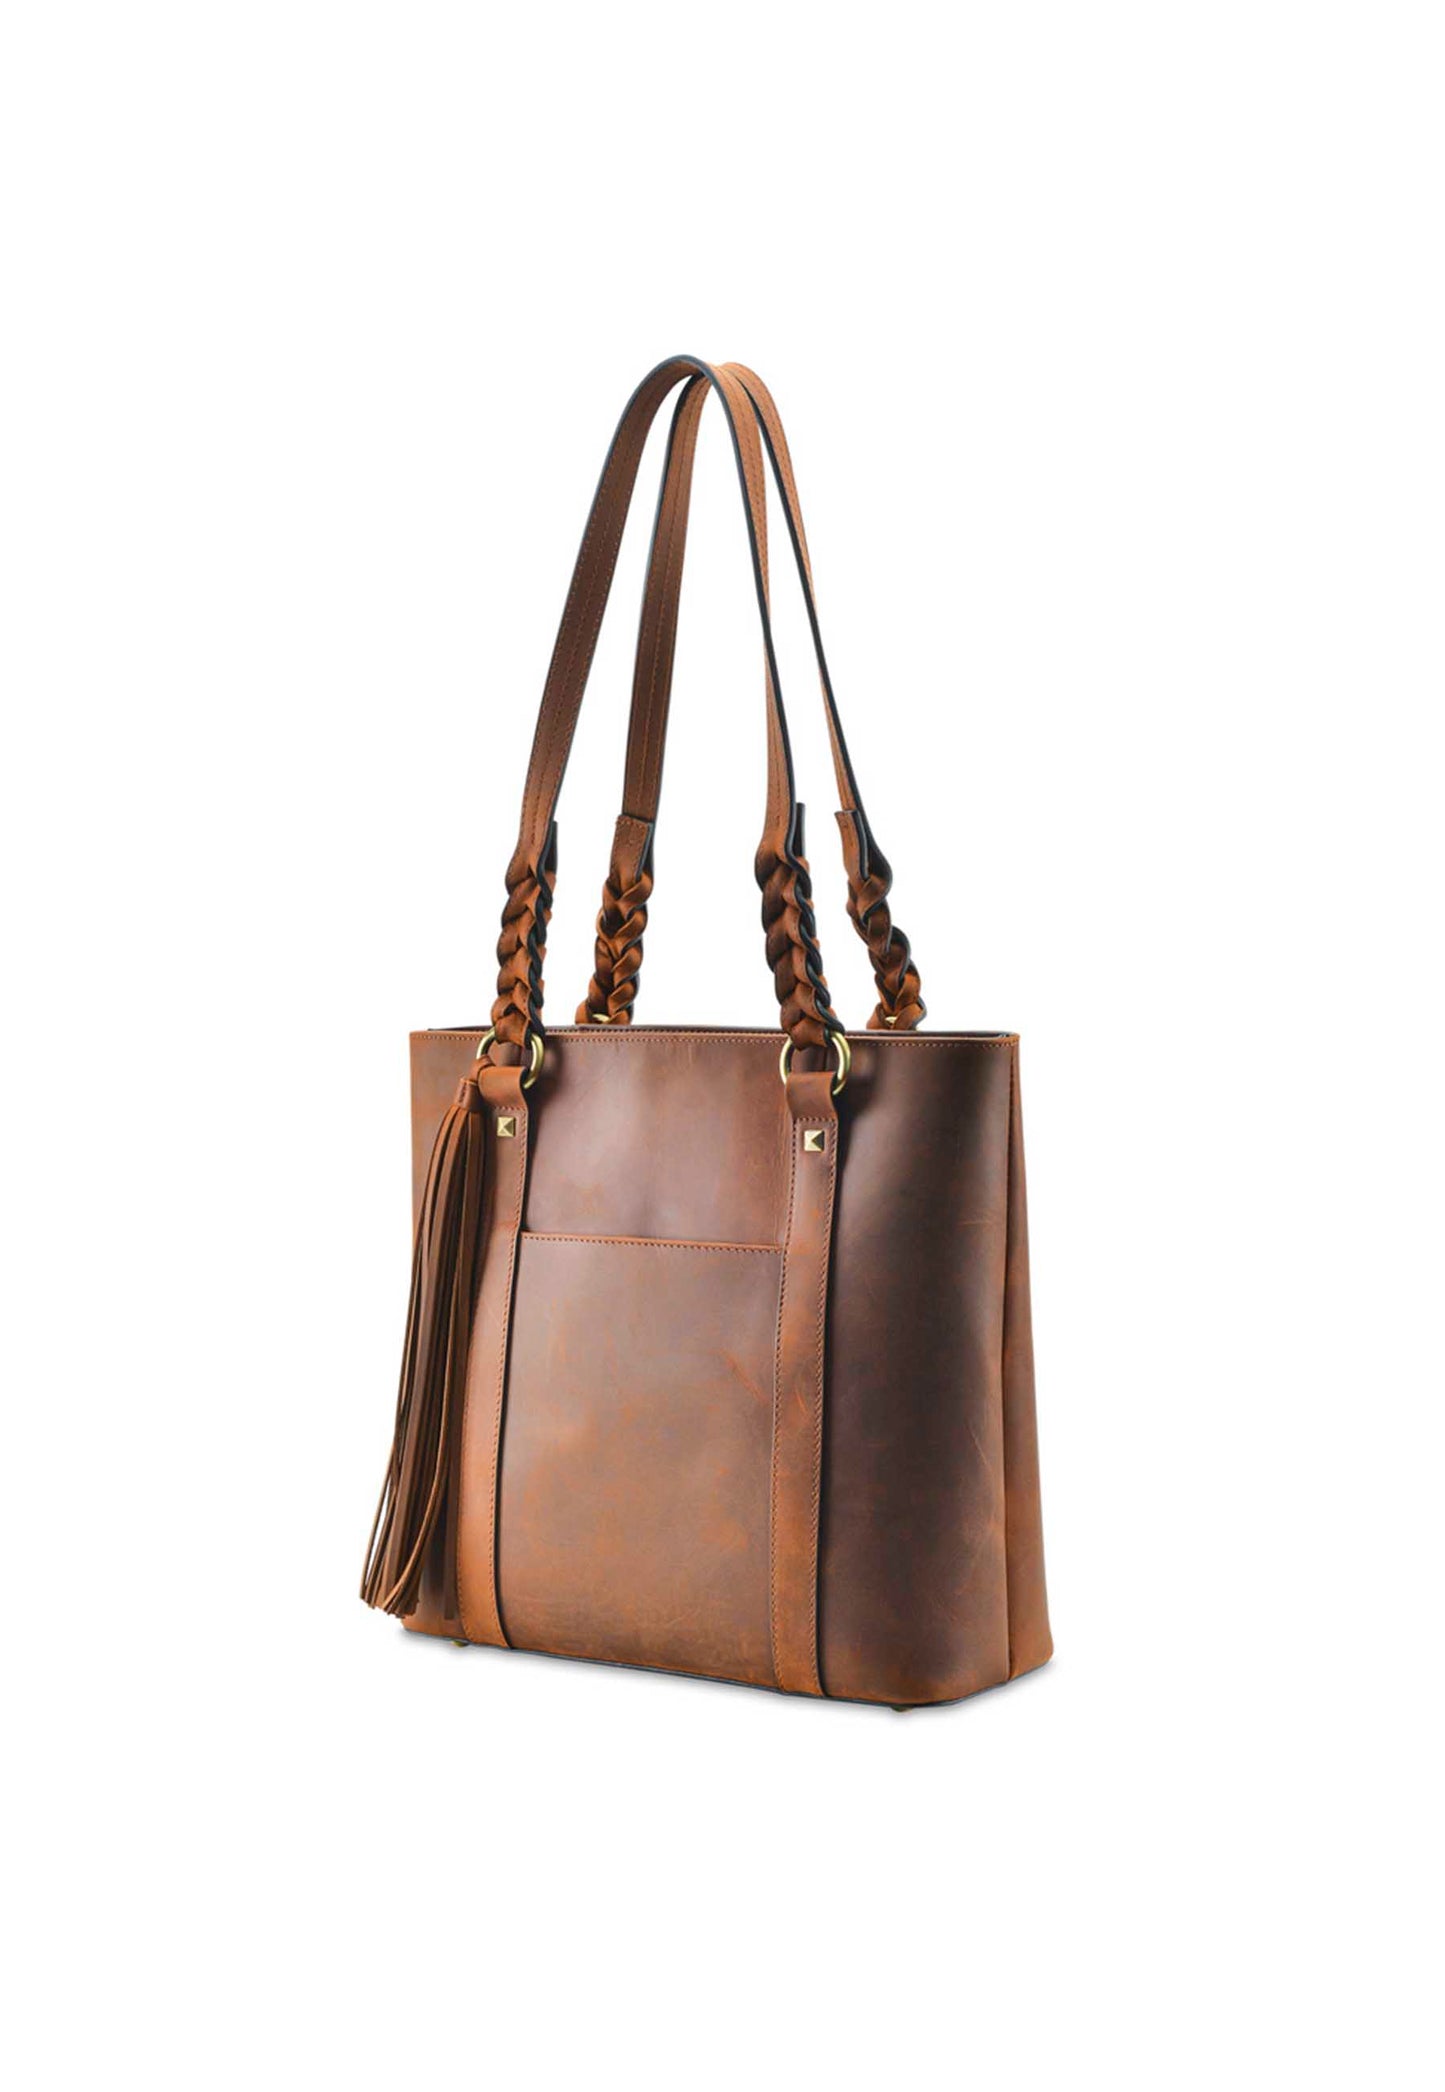 Brown leather tote conceal carry purse